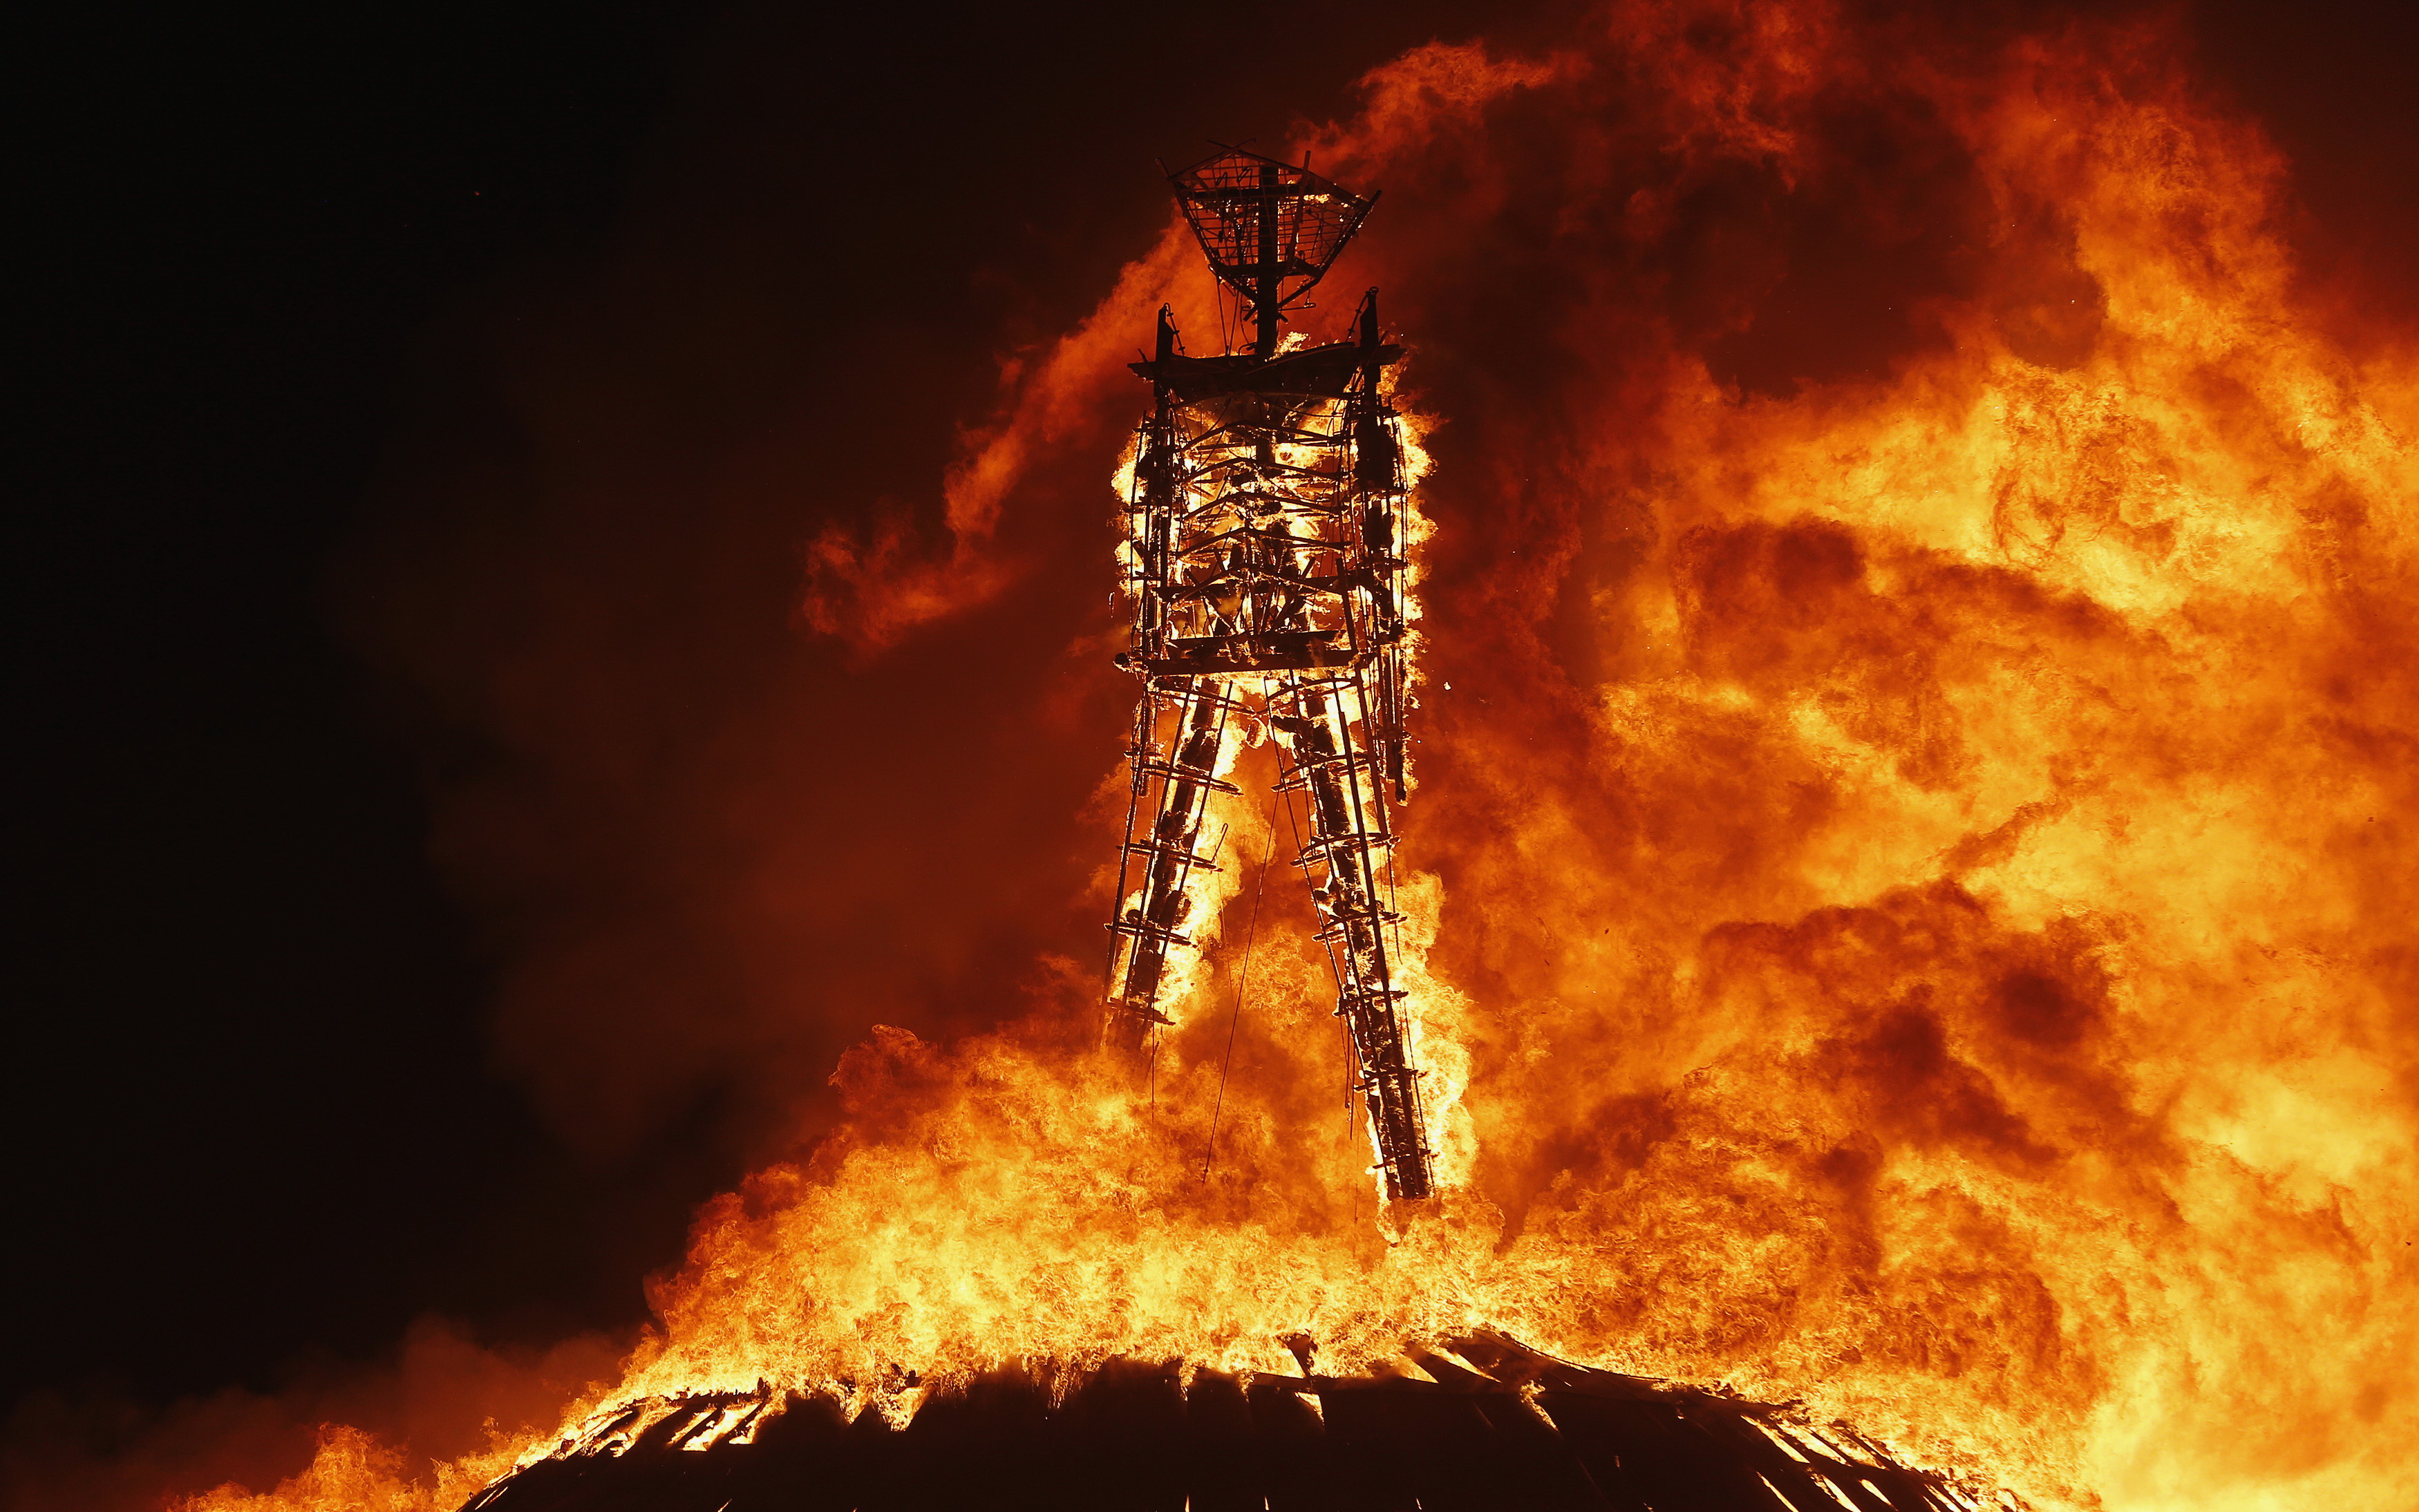 the-man-burns-during-the-burning-man-2013-arts-and-music-festival-in-the-black-rock-desert-of-nevada-august-31-2013-by-jim-urquhart.jpg